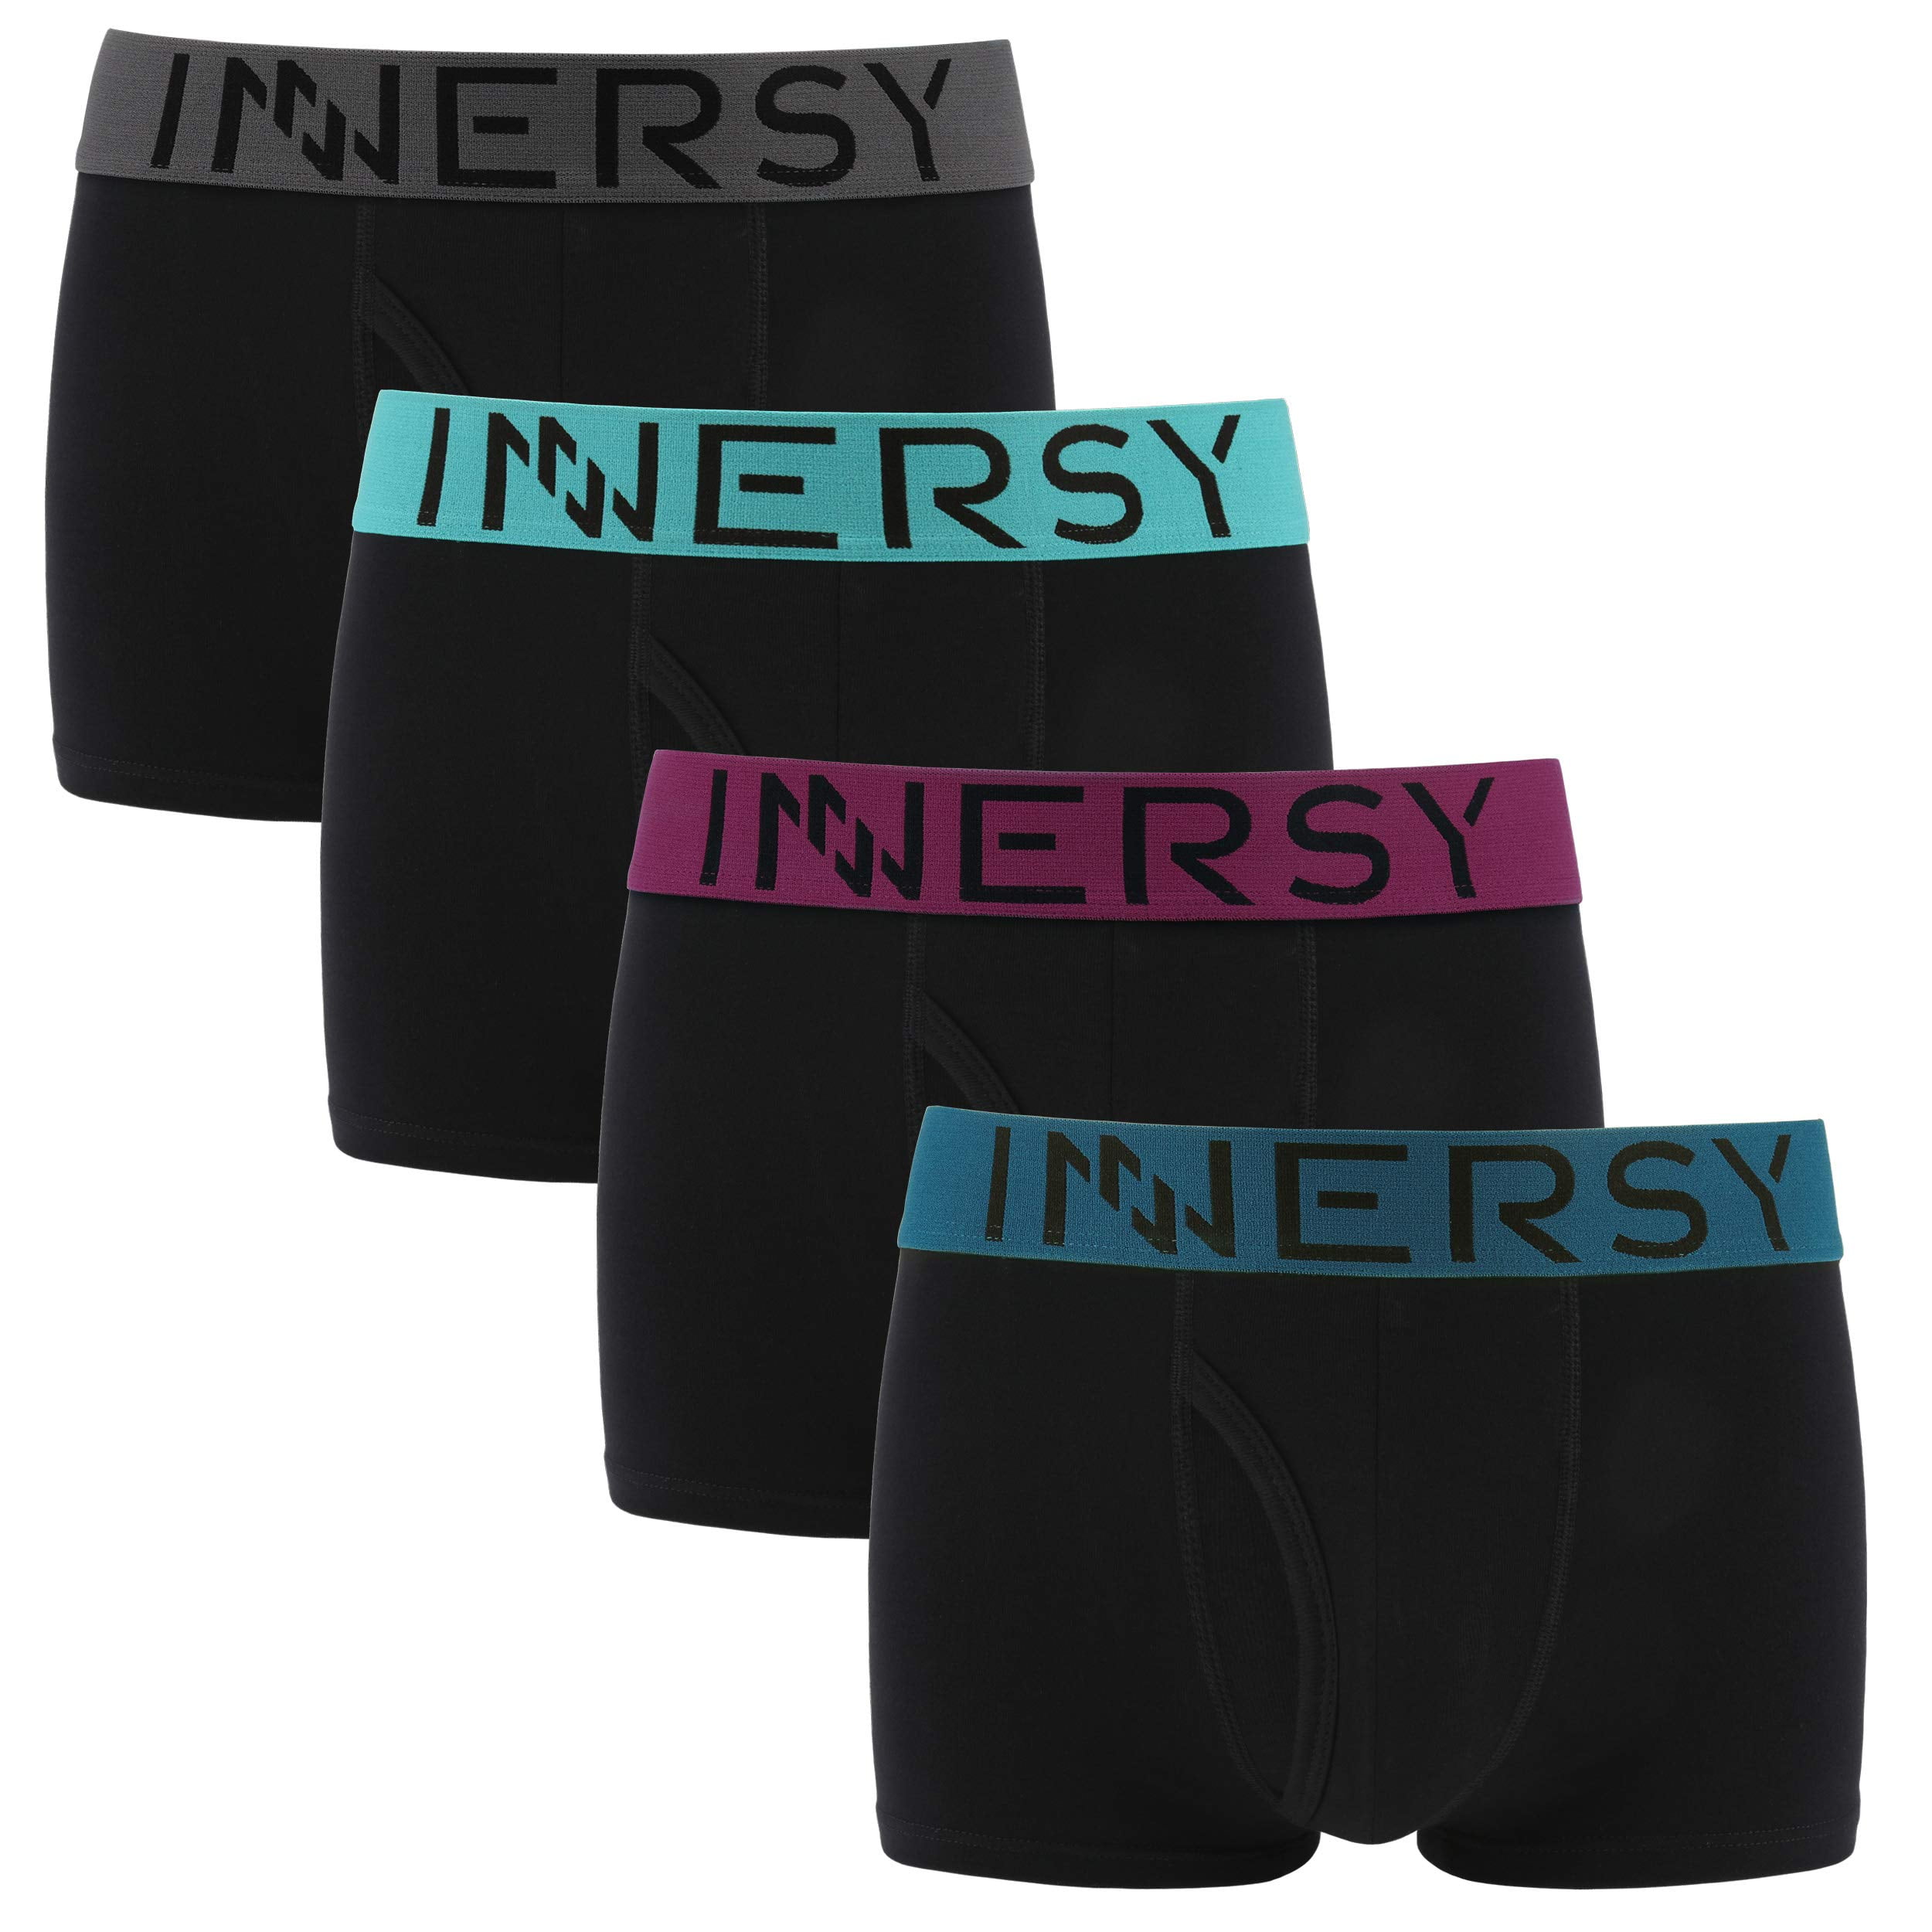 INNERSY Mens Underwear Trunks Open Fly Stretch Cotton Boxer Shorts Low Rise Pants Pack of 4